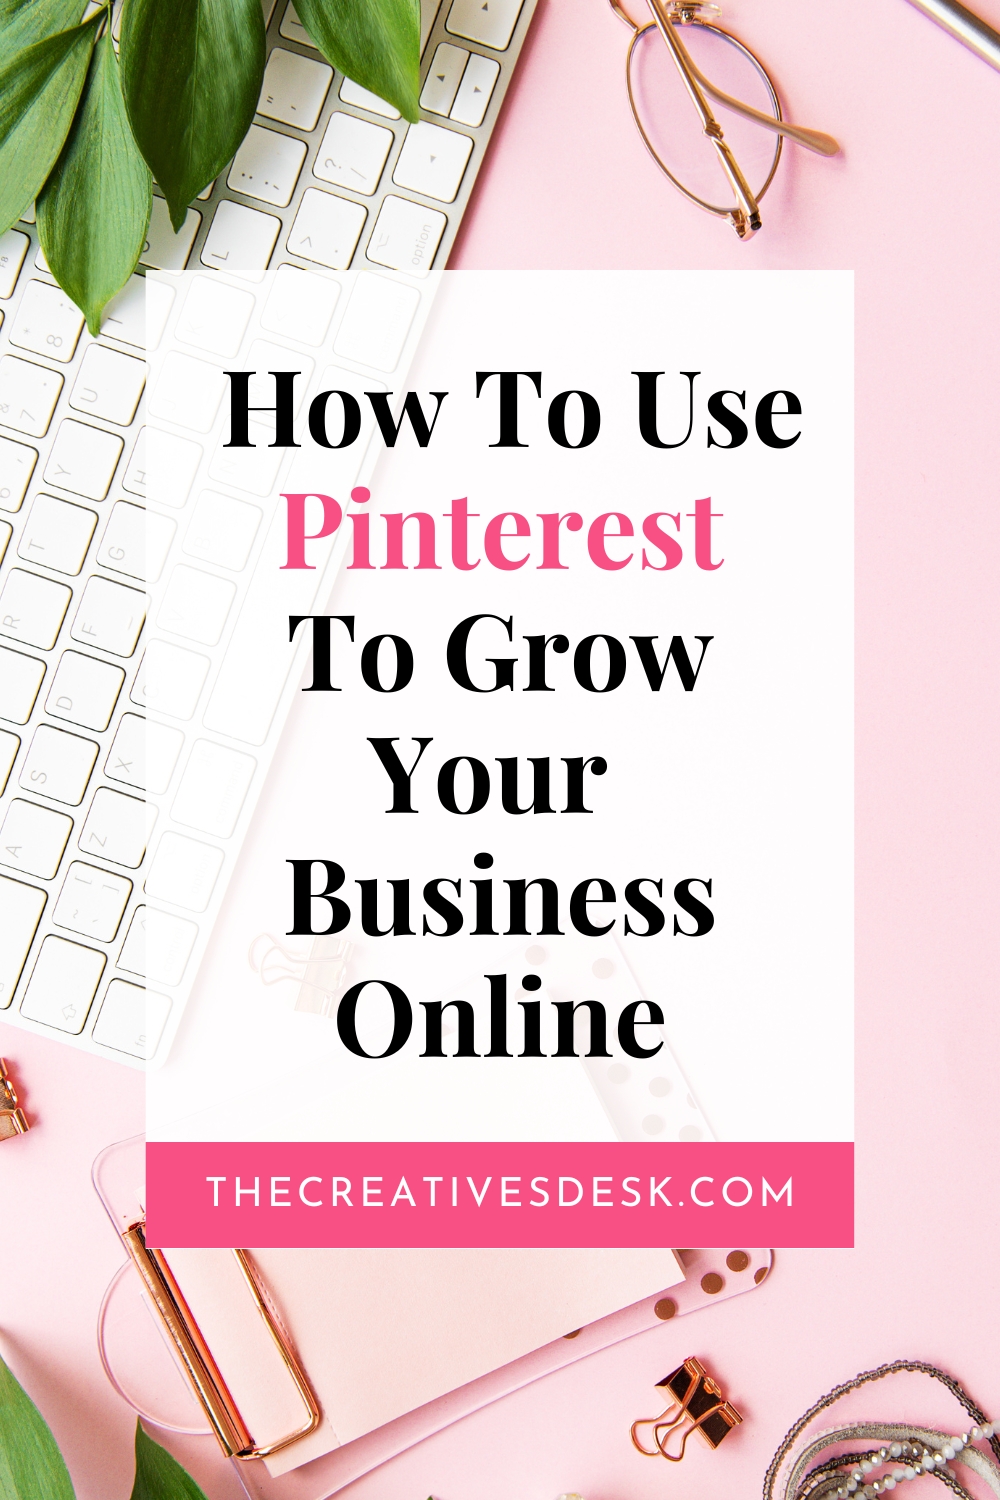 How To Use Pinterest To Help Grow Your Business Online